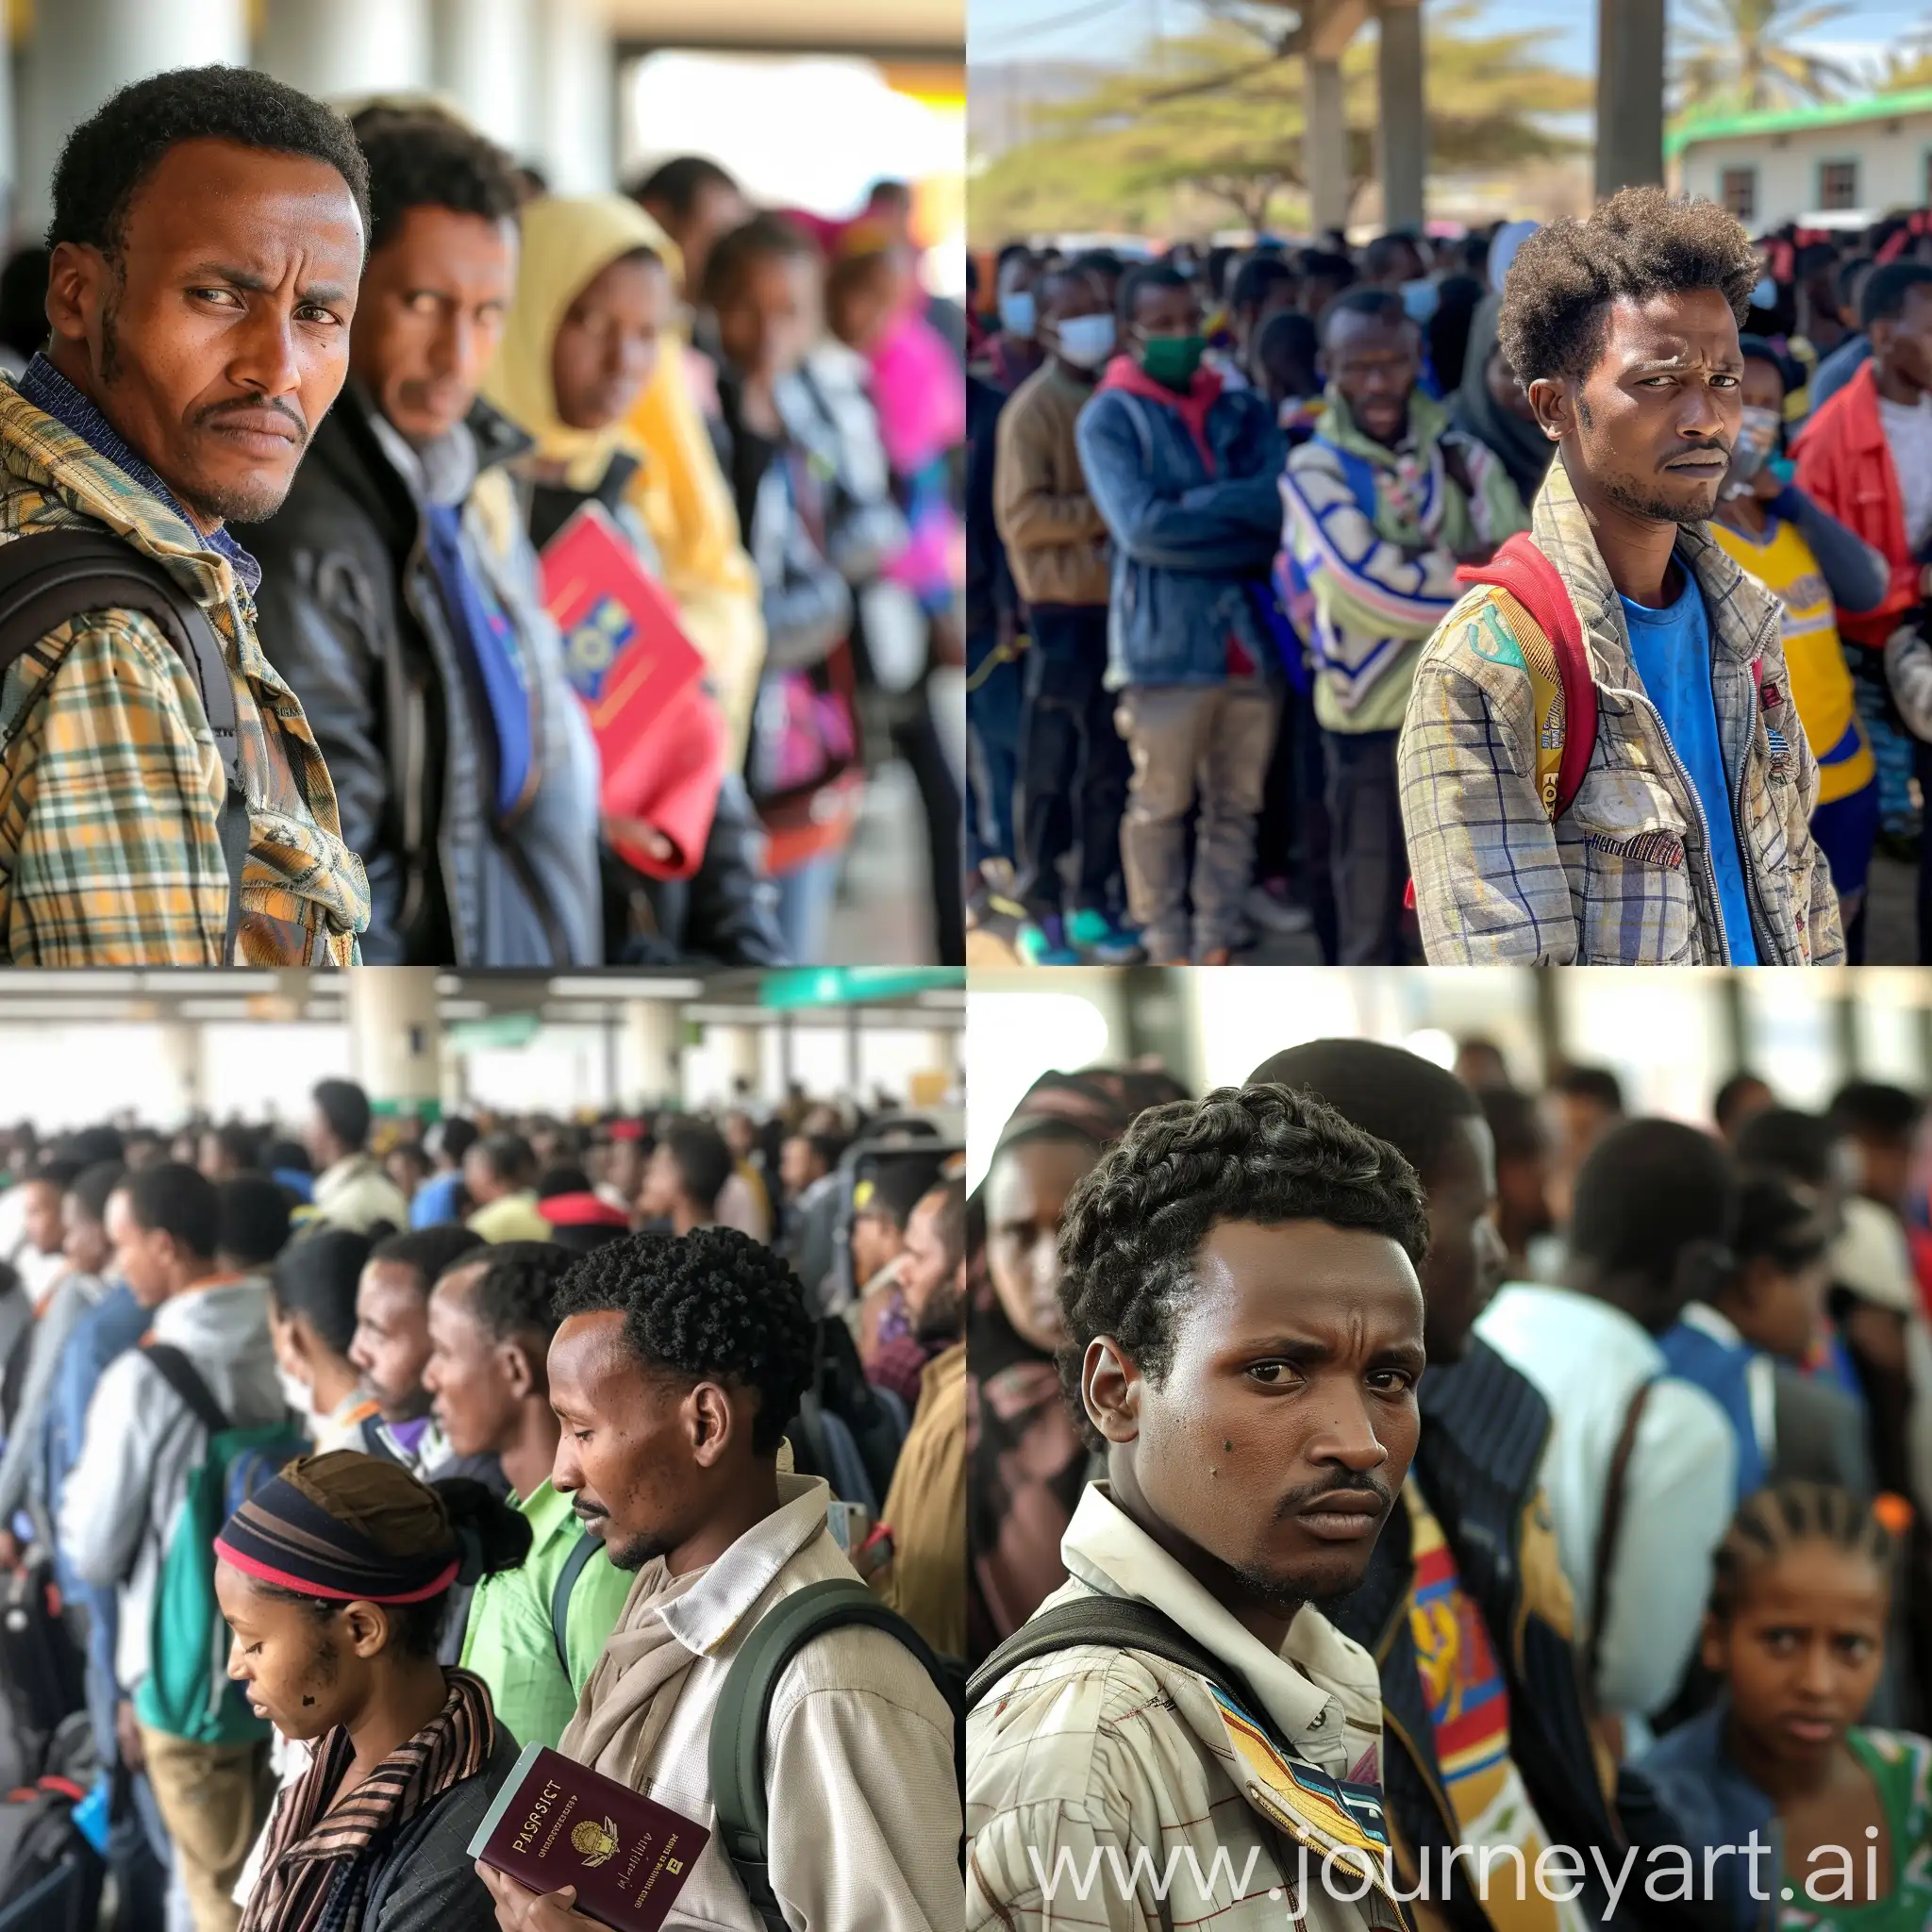 Generate me a image of people from Ethiopia that are in queue waiting in immigration to renew their passport